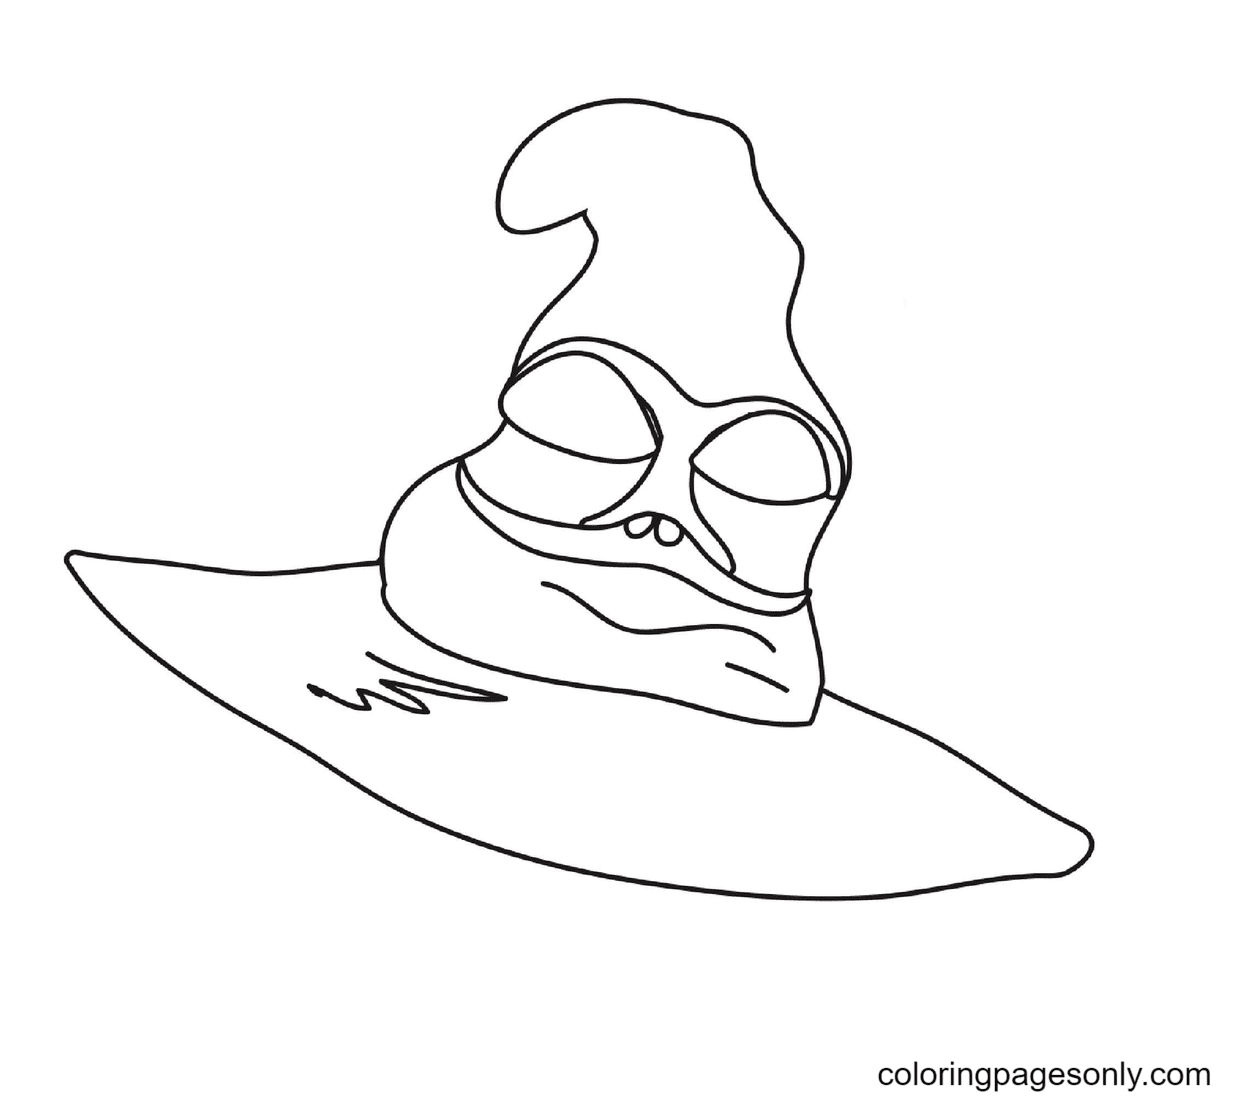 Printable Witch Hat Coloring Page